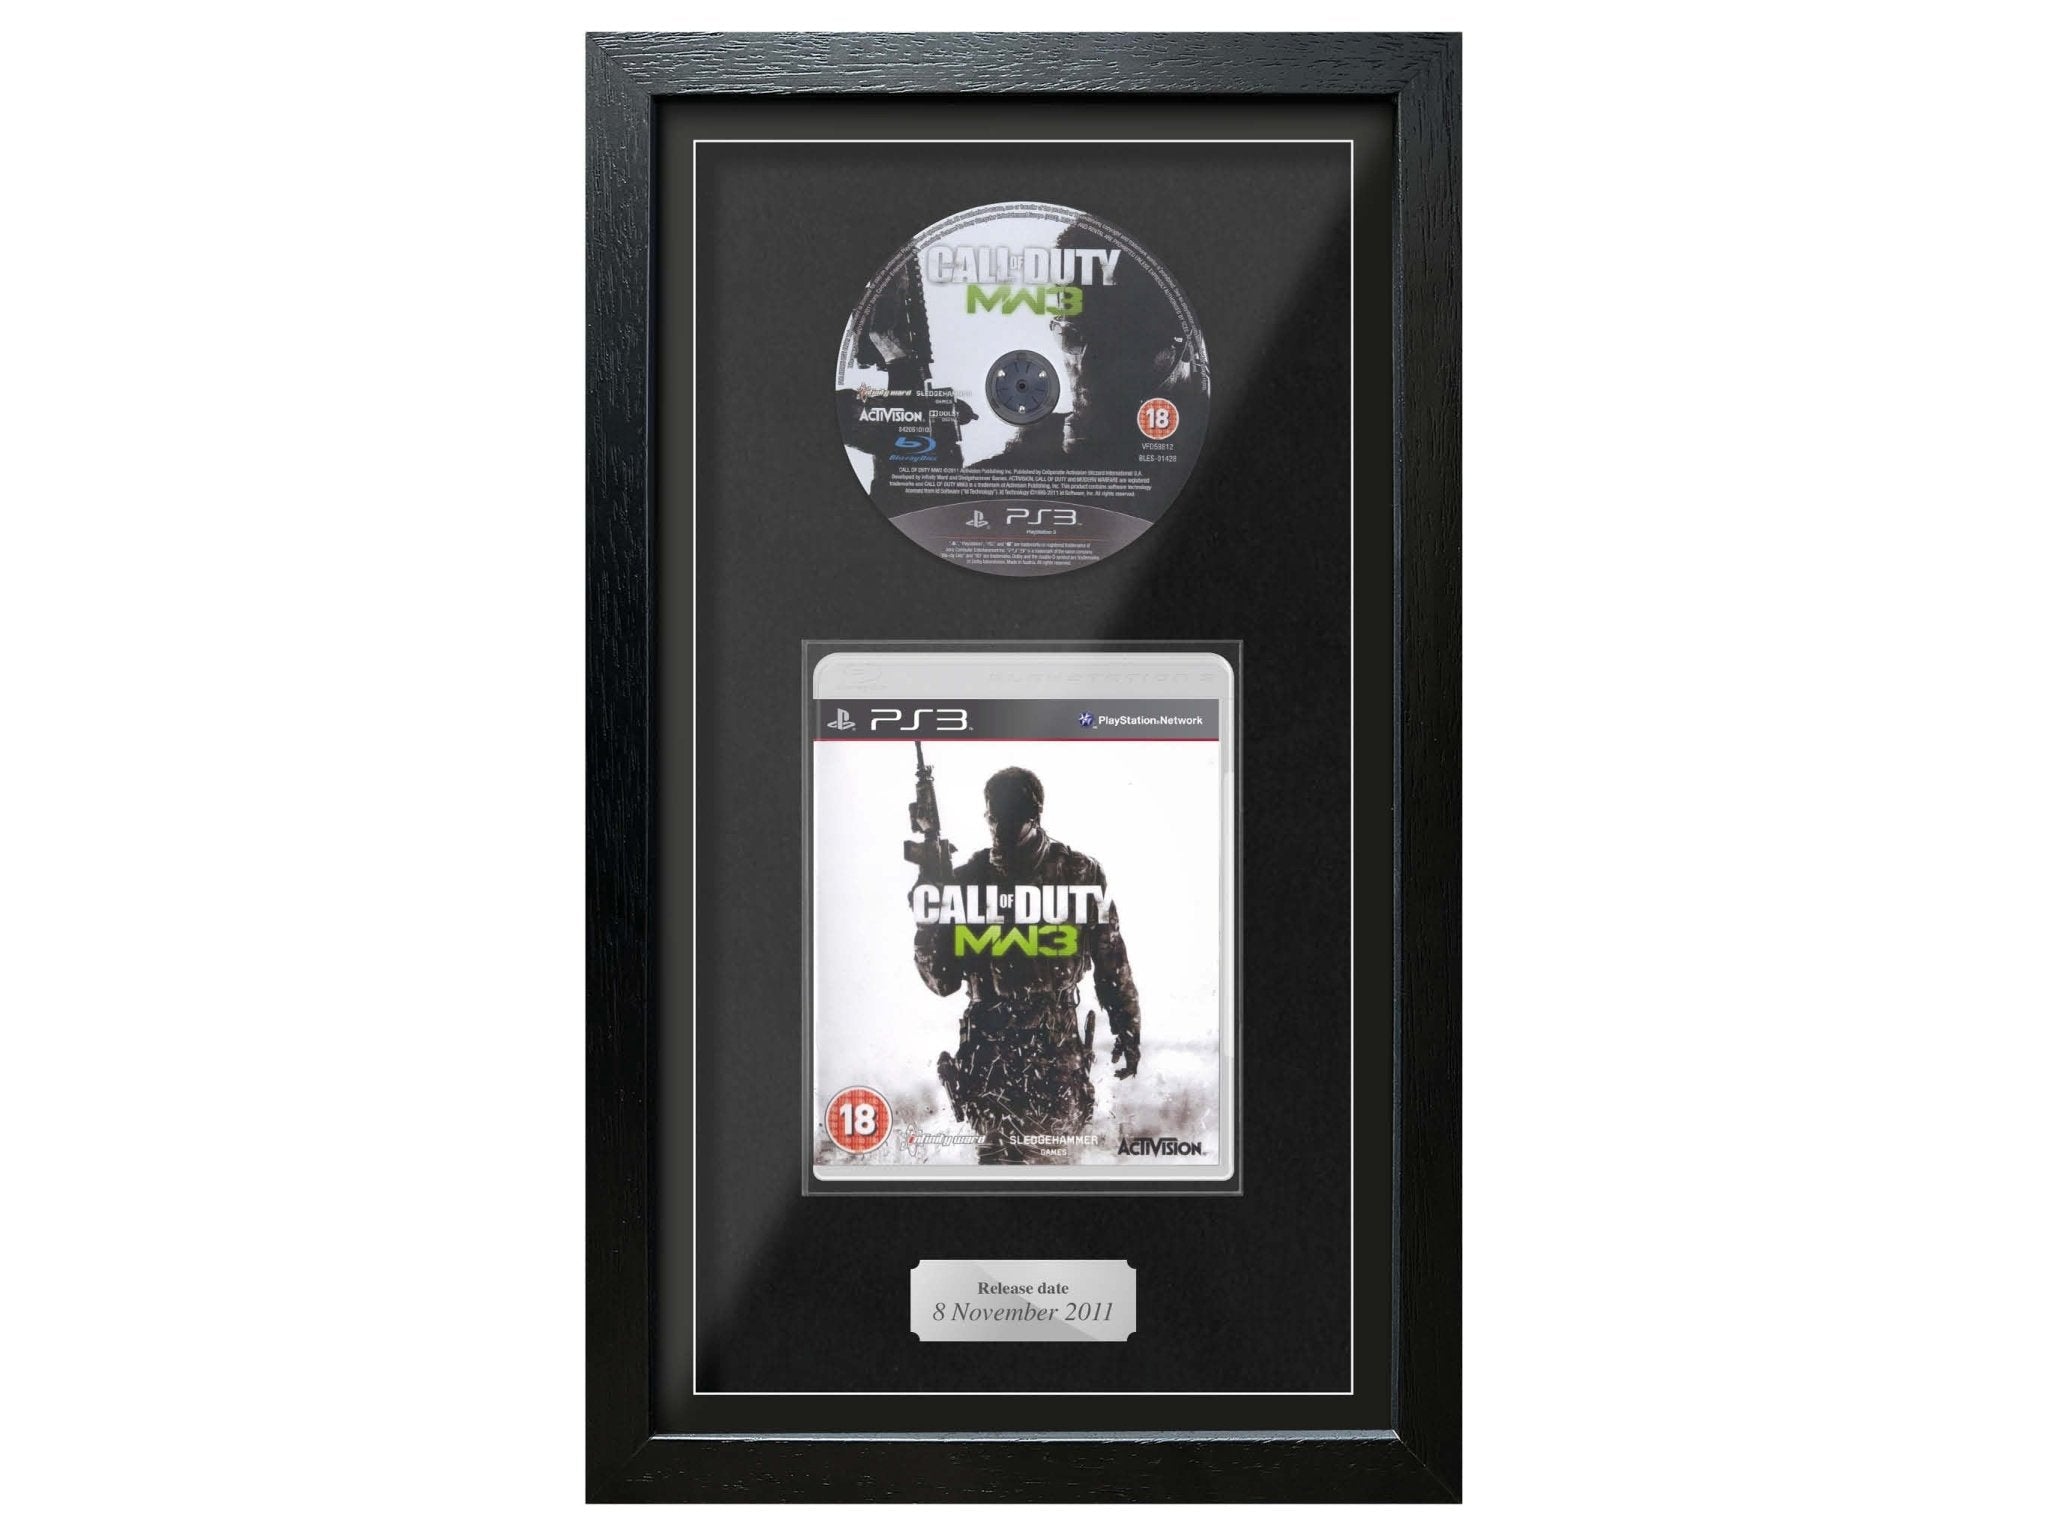 Call of Duty: Modern Warfare 3 (PS3) Exhibition Range Framed Game - Frame-A-Game